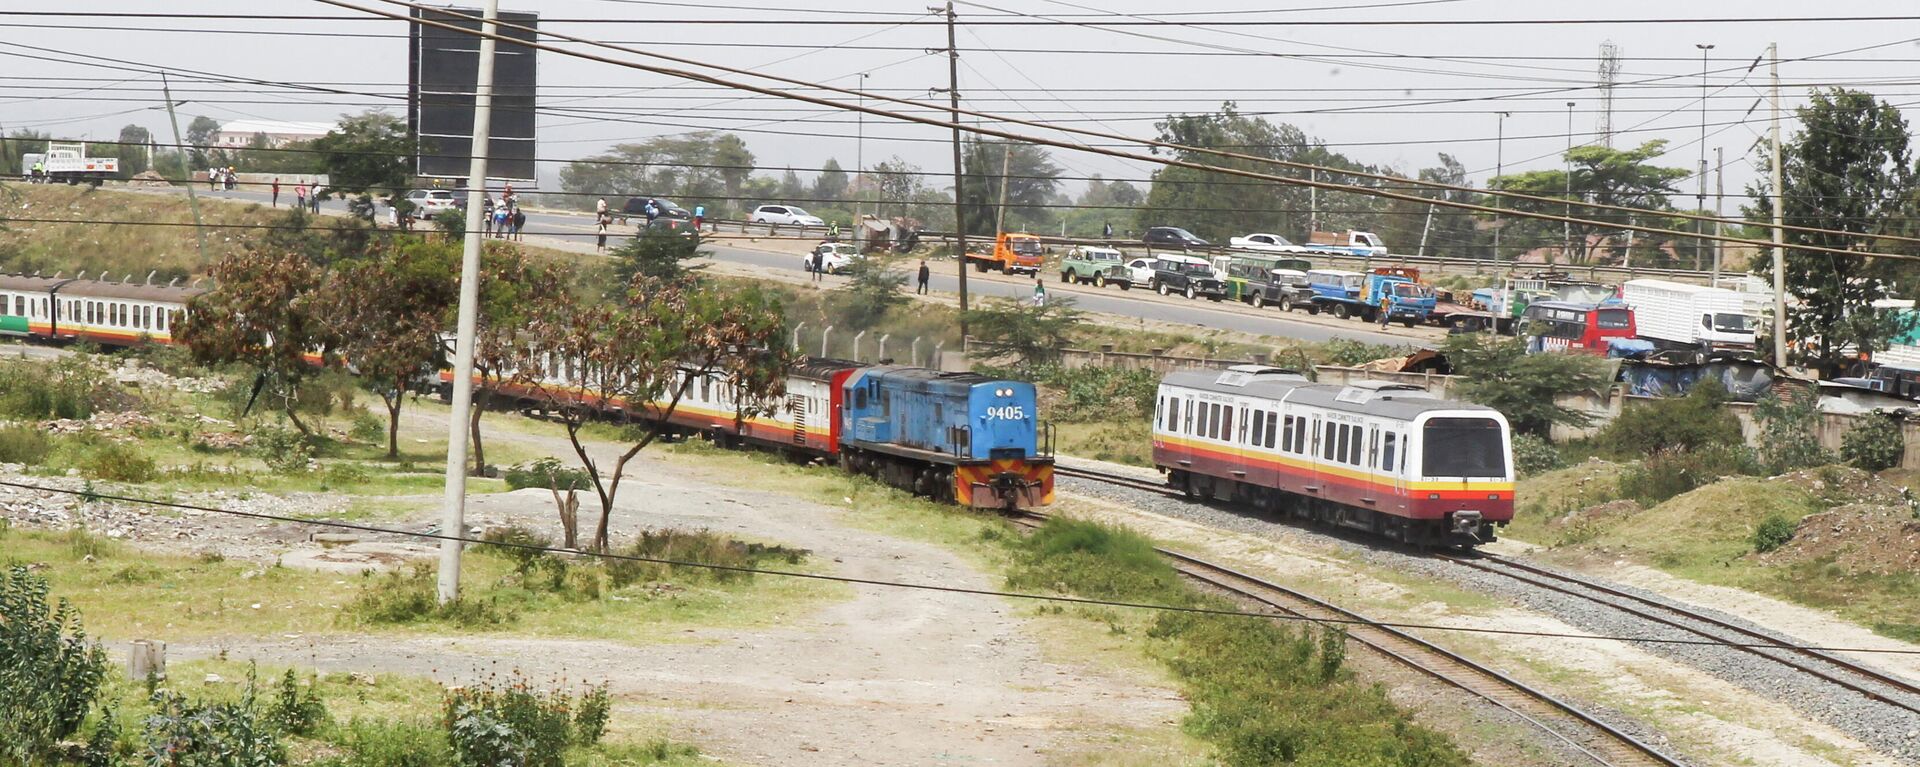 A Diesel Mobile Unit (DMU) train of the Nairobi Commuter Rail Service (NCRS) operated by the Kenya Railway Corporation (KRC) from Embakasi to Nairobi is seen near the old generation locomotive engine train as it rides past Electricity power lines near the Donholm station in Nairobi, Kenya January 11, 2022. - Sputnik International, 1920, 11.01.2022